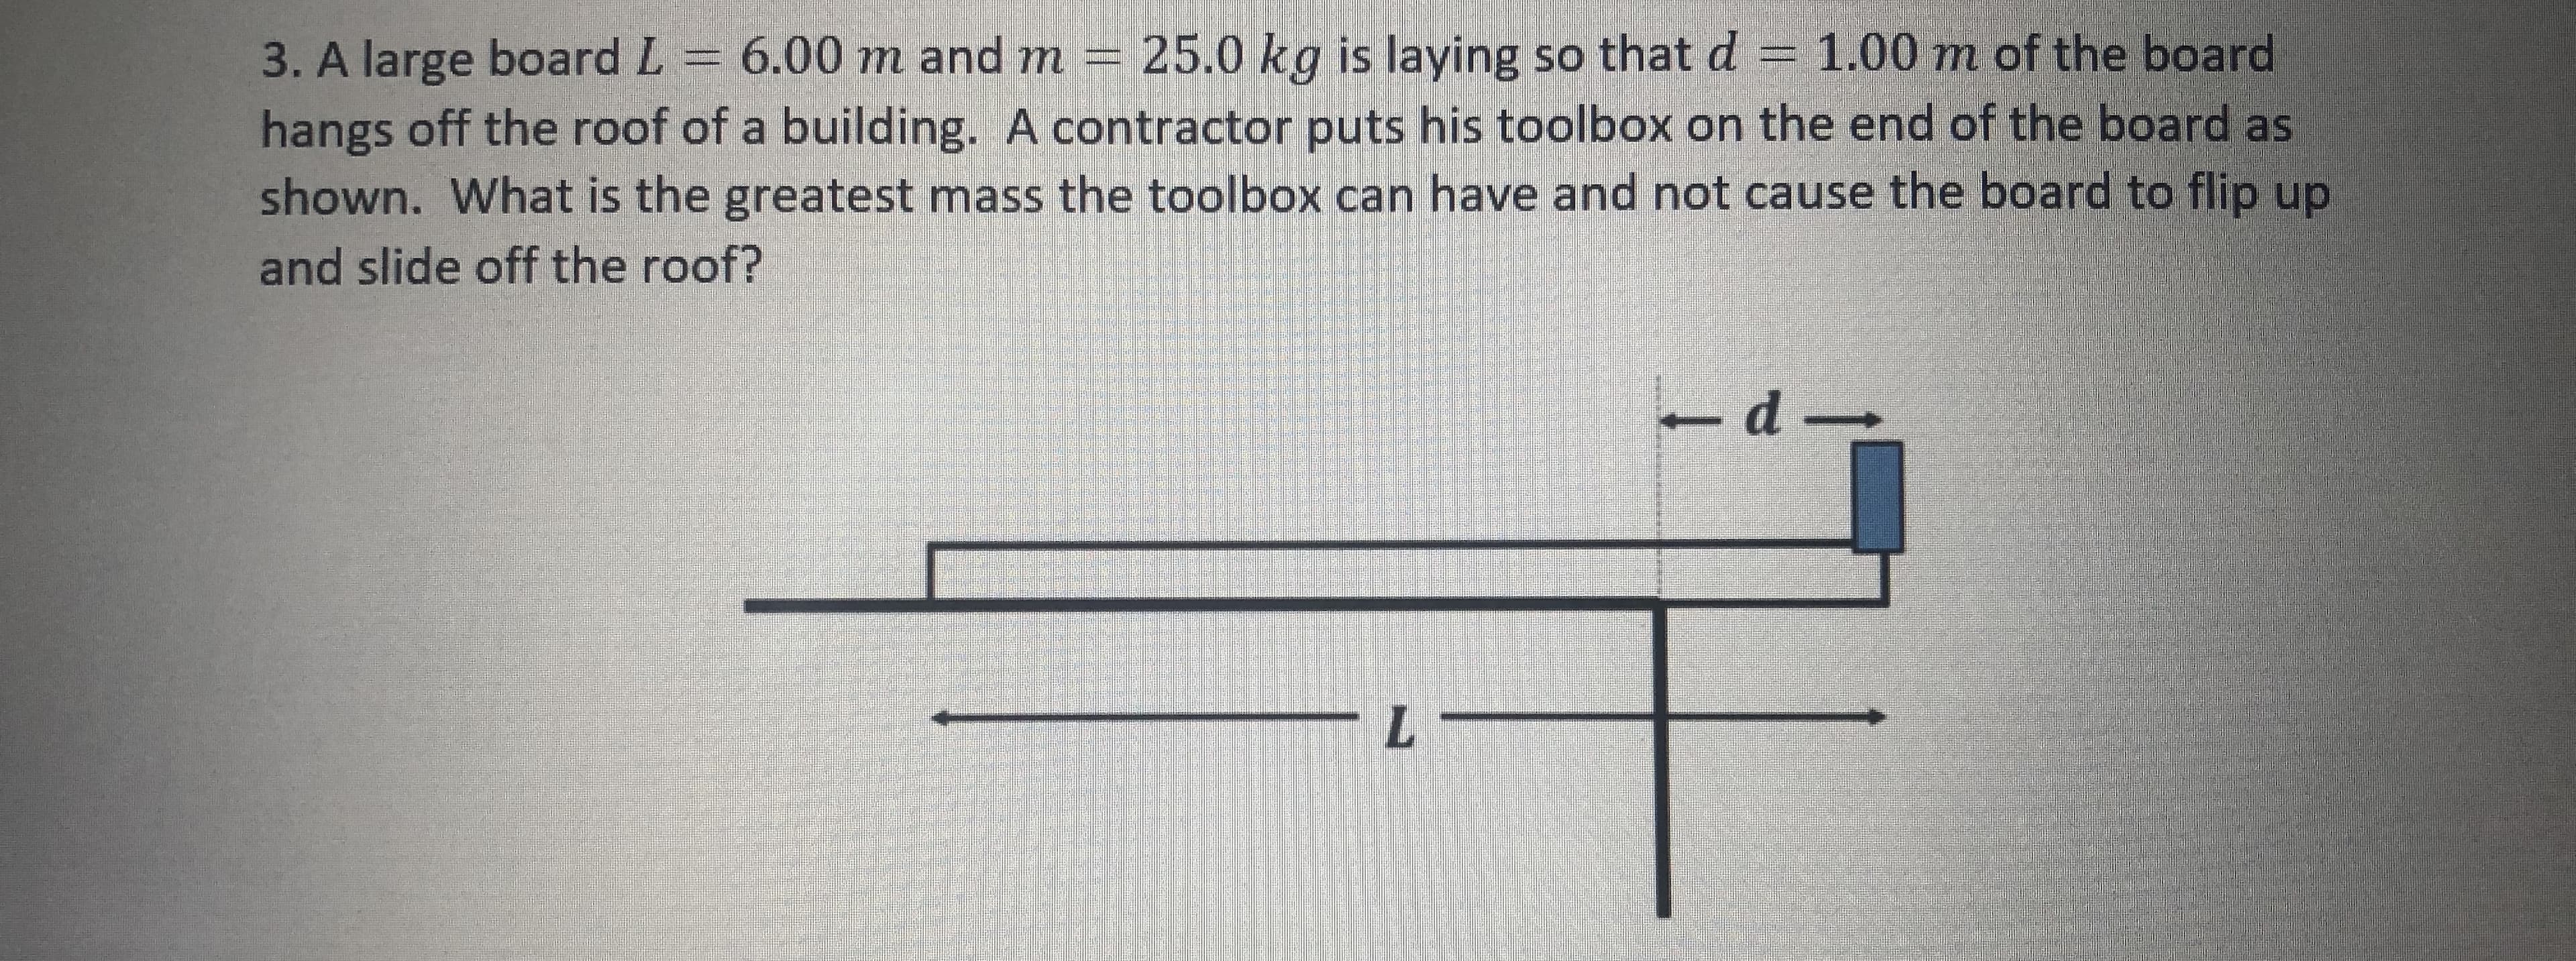 3. A large board L 6.00 m and m 25.0 kg is laying so that d = 1.00 m of the board
hangs off the roof of a building. A contractor puts his toolbox on the end of the board as
shown. What is the greatest mass the toolbox can have and not cause the board to flip up
and slide off the roof?
